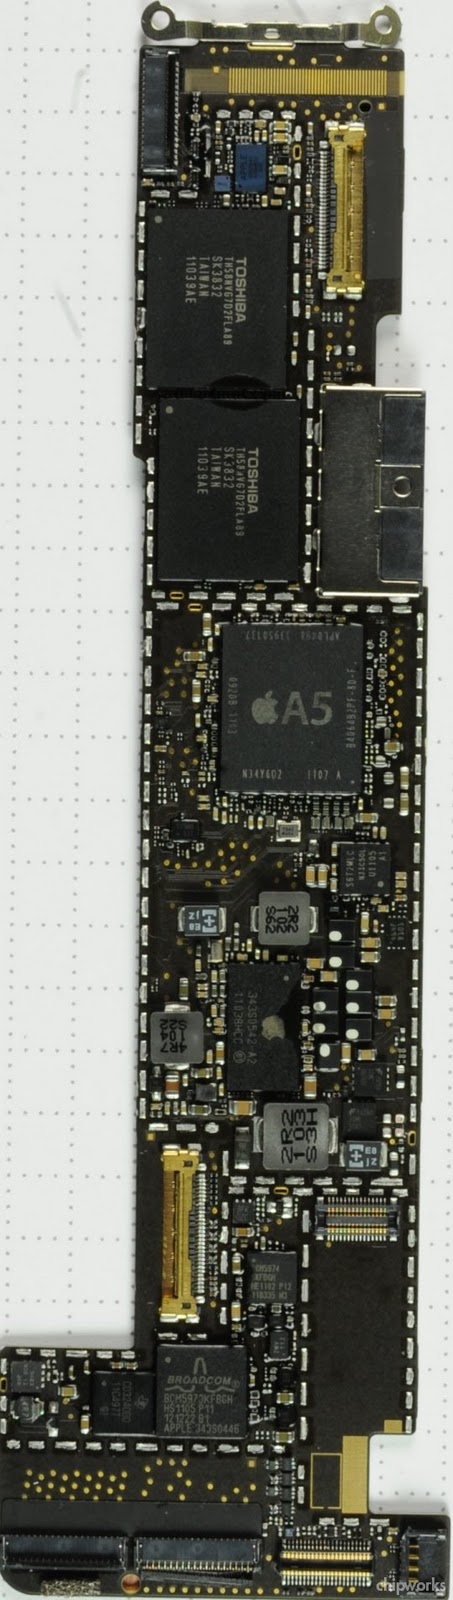 Chipworks Real Chips: Apple's A5 Processor is by Samsung, not TSMC